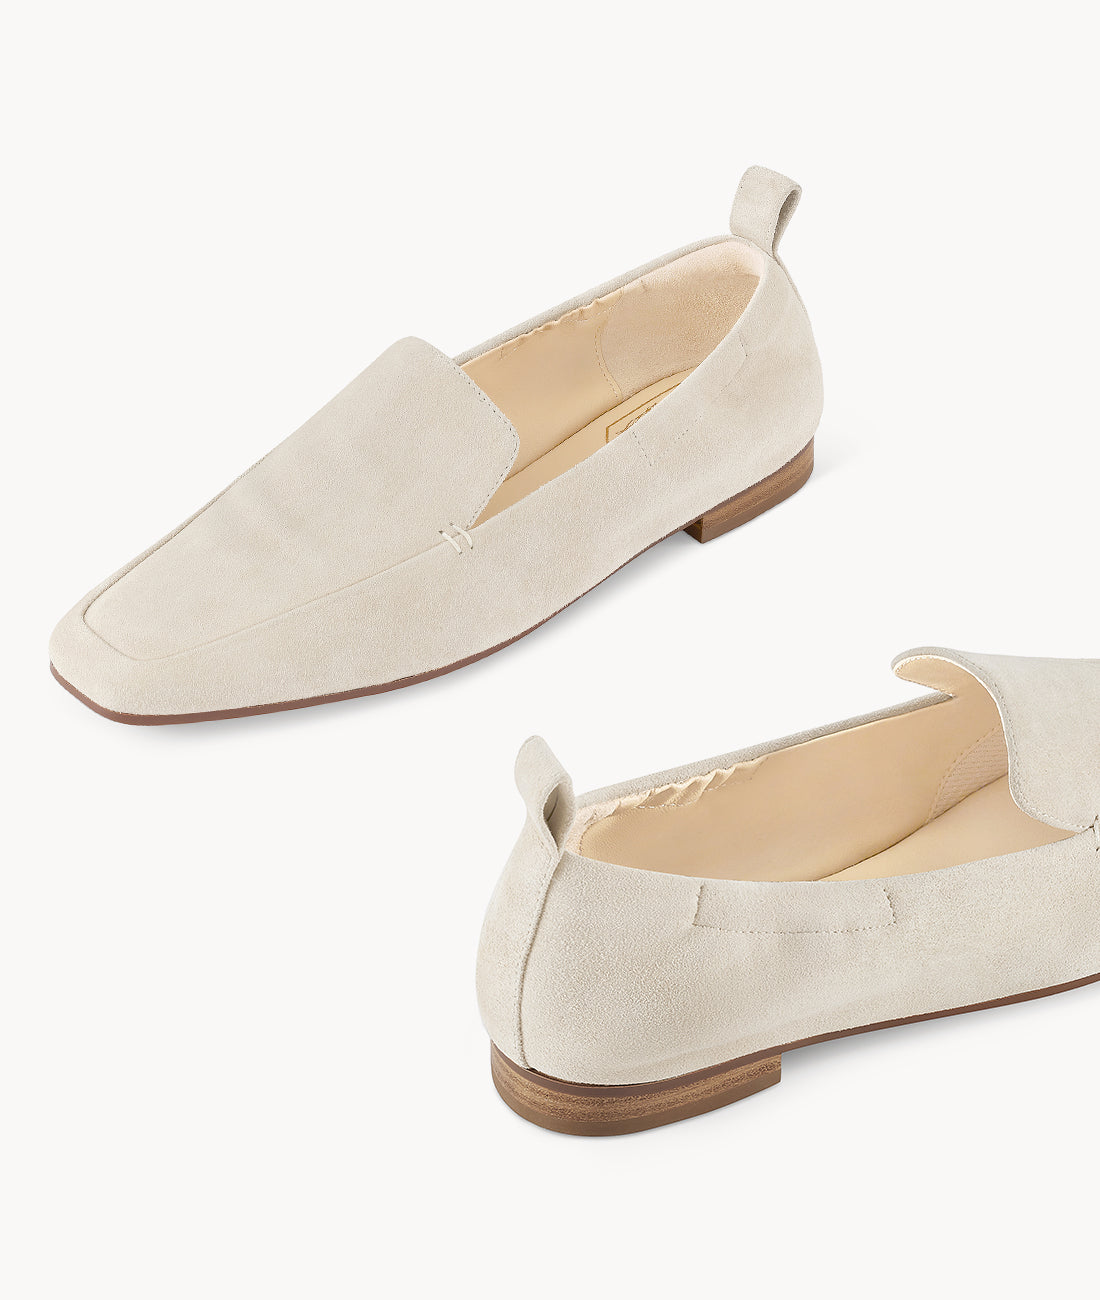 Almond Croissant Square-toe Creamy White suede Mattress Flat Loafers with 18mm heel